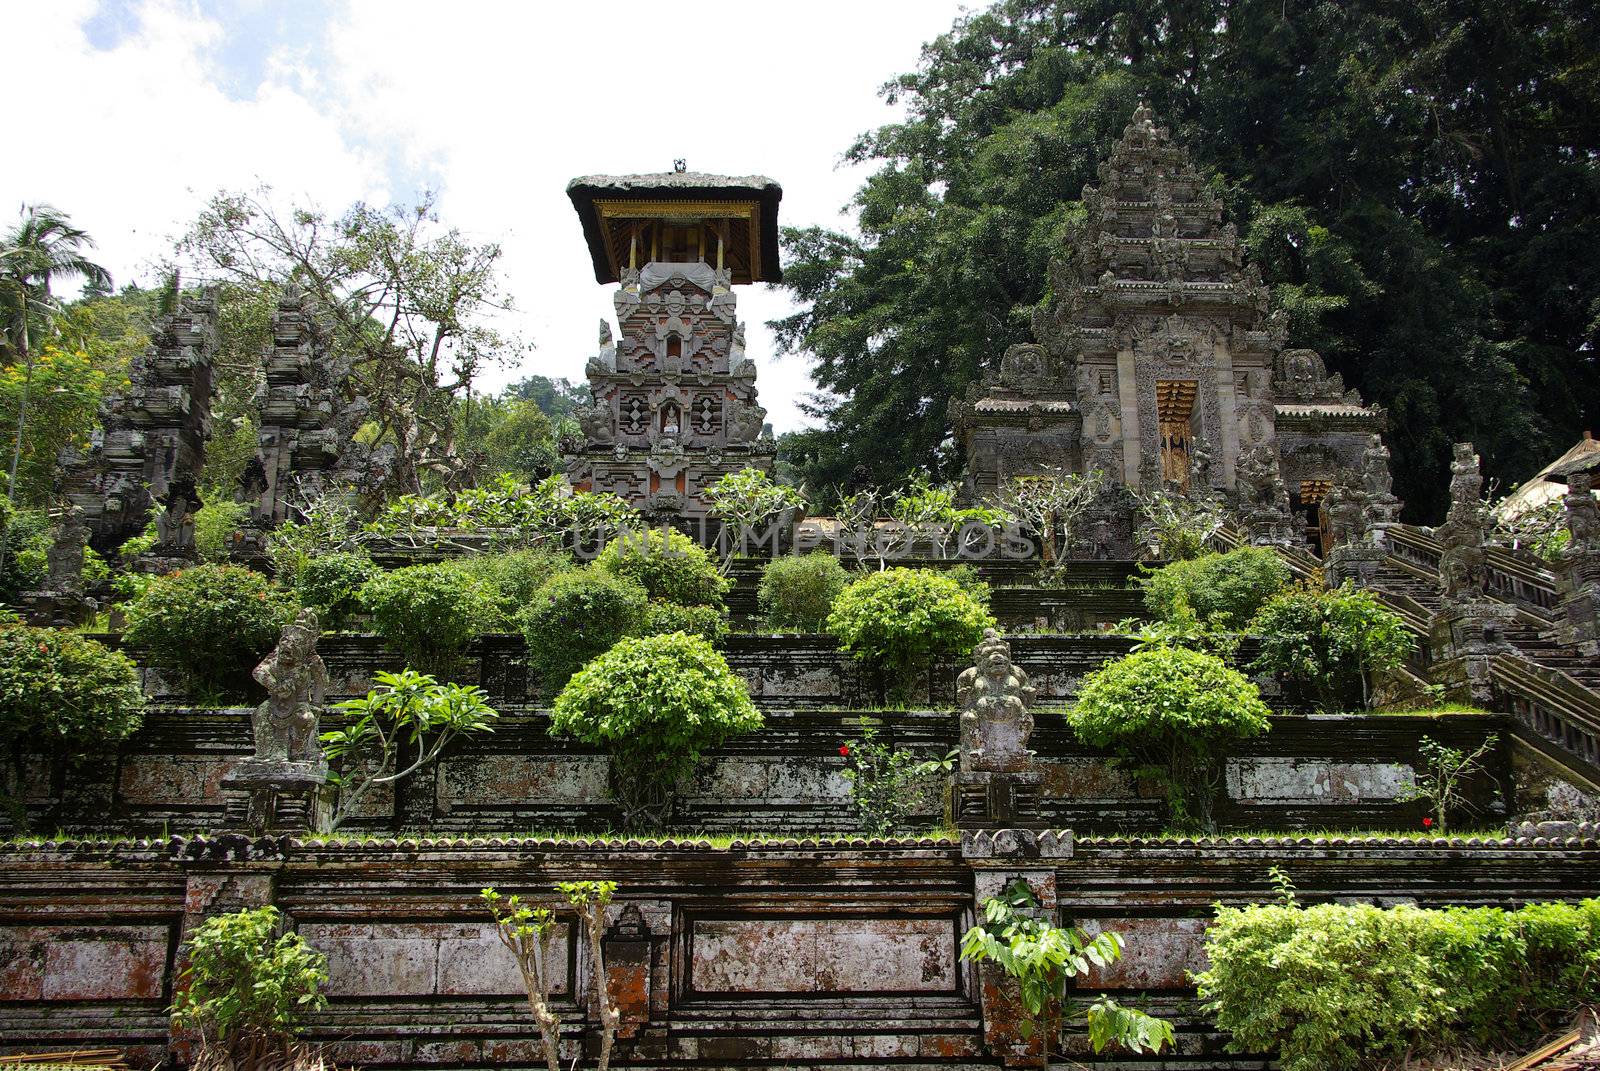 This is the big entrance in stone with vegetation of a Balinese temple